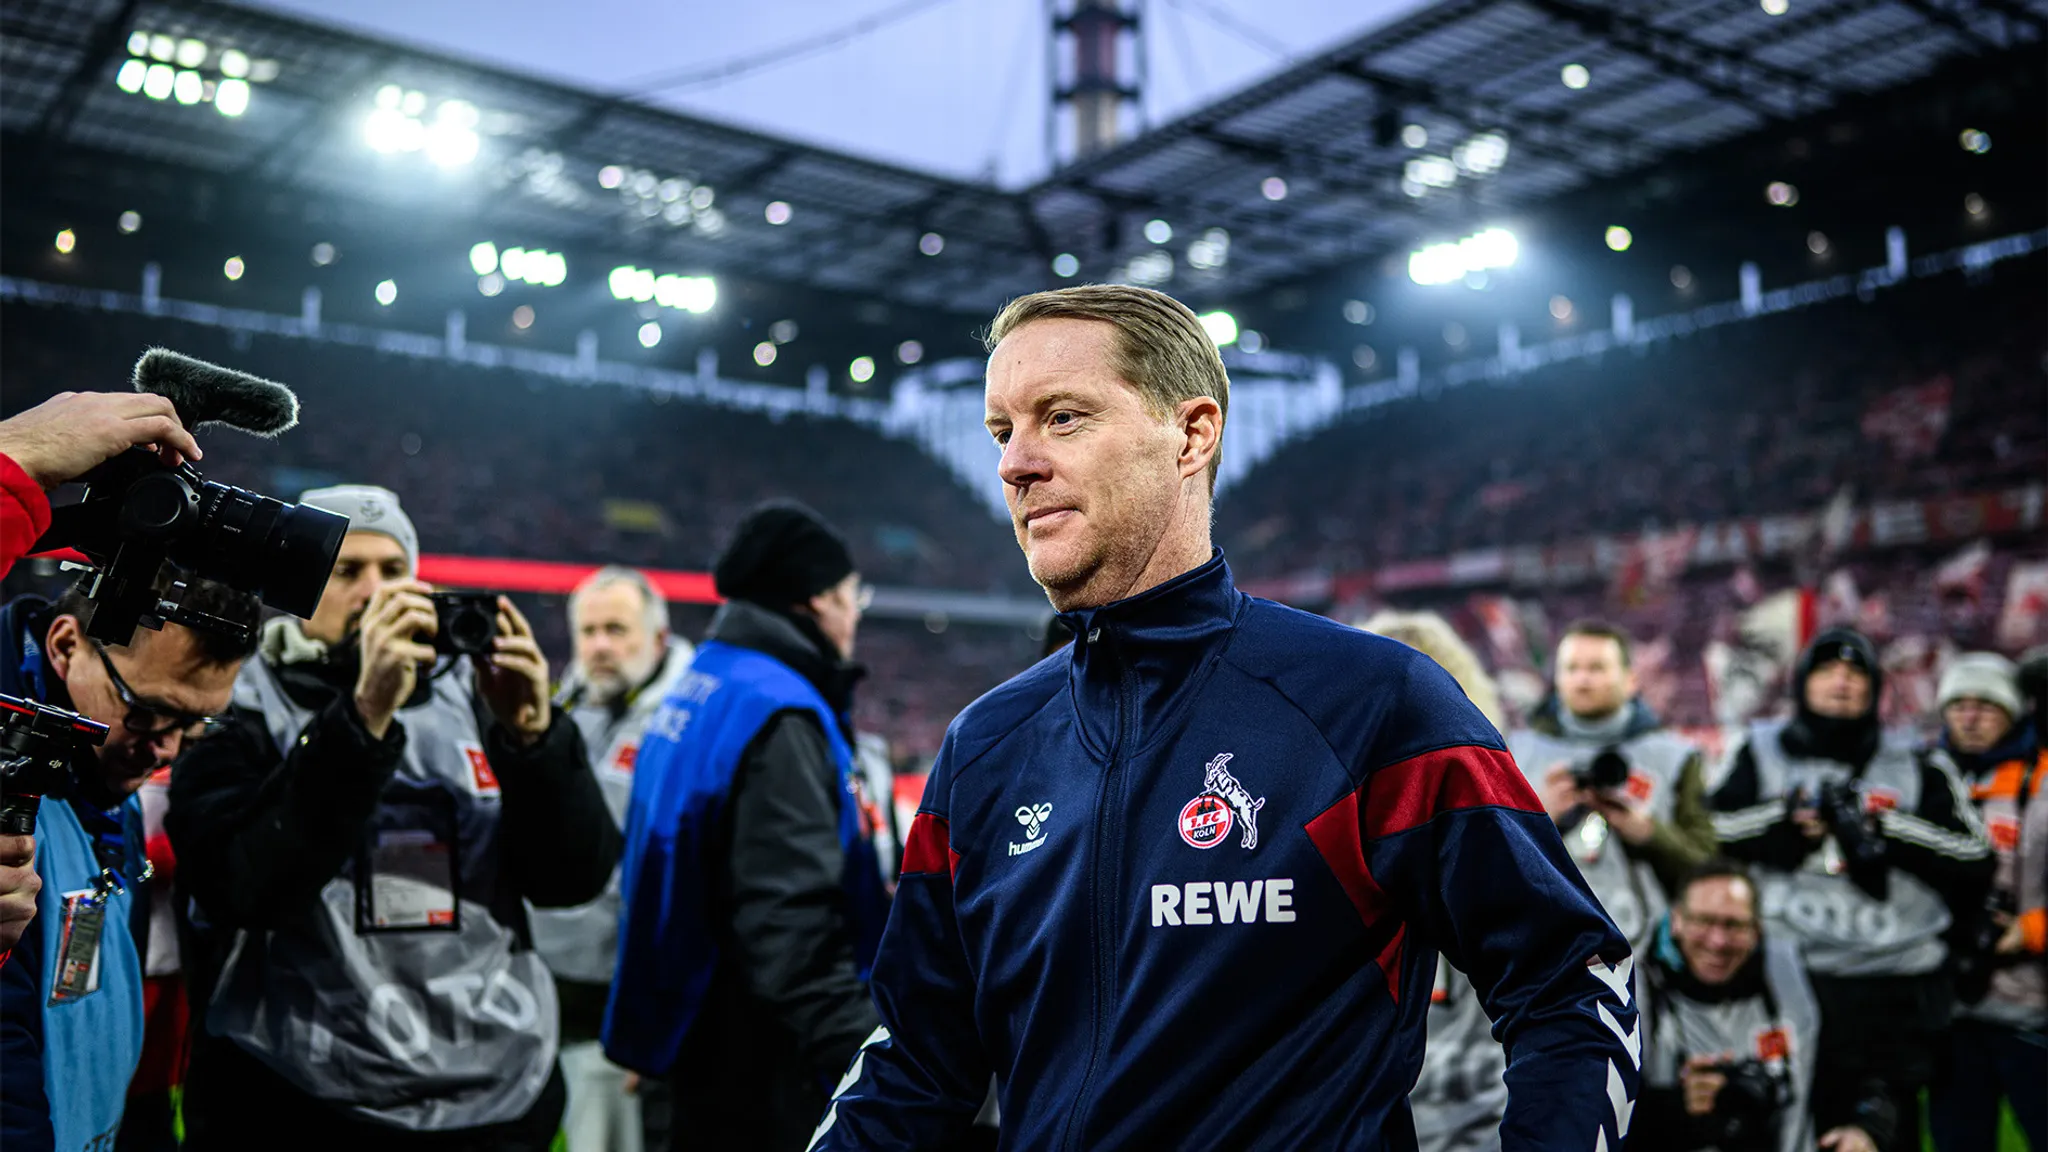 Timo Schultz took over as head coach at 1. FC Köln at the turn of the year.